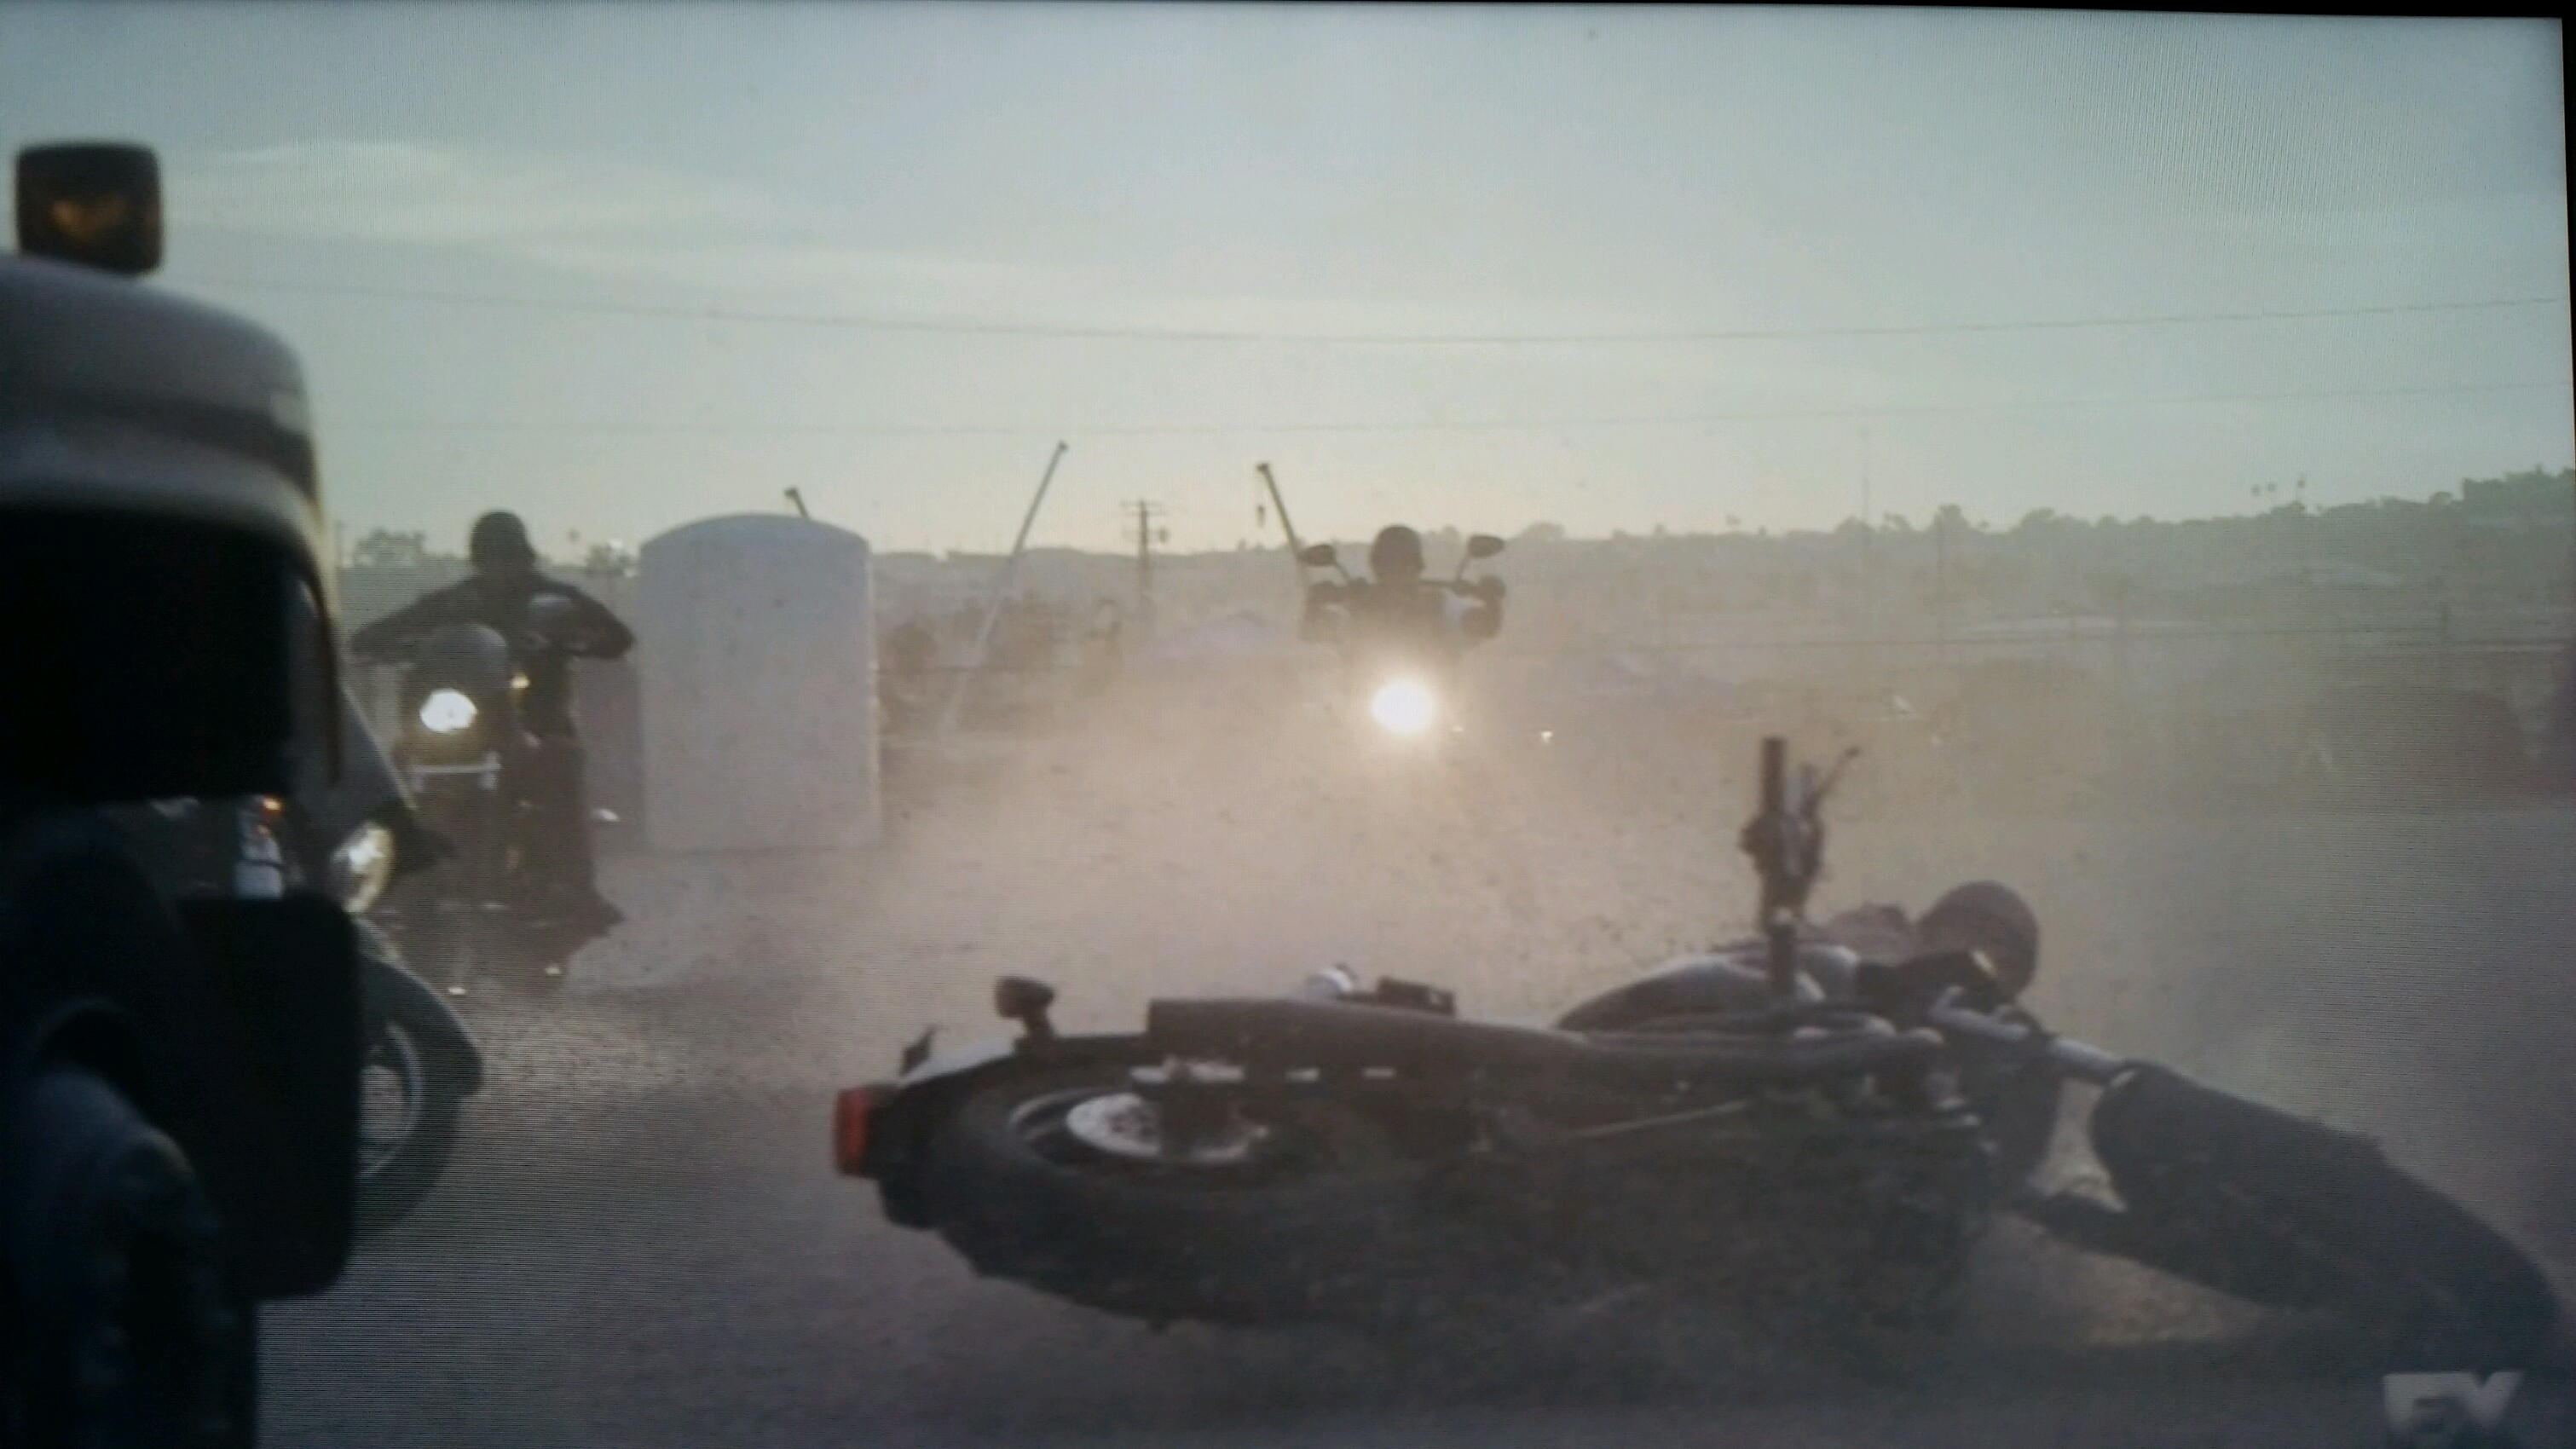 Sons of Anarchy finale. Tom McComas and stuntmen throw bikes down for crash scene during chase.